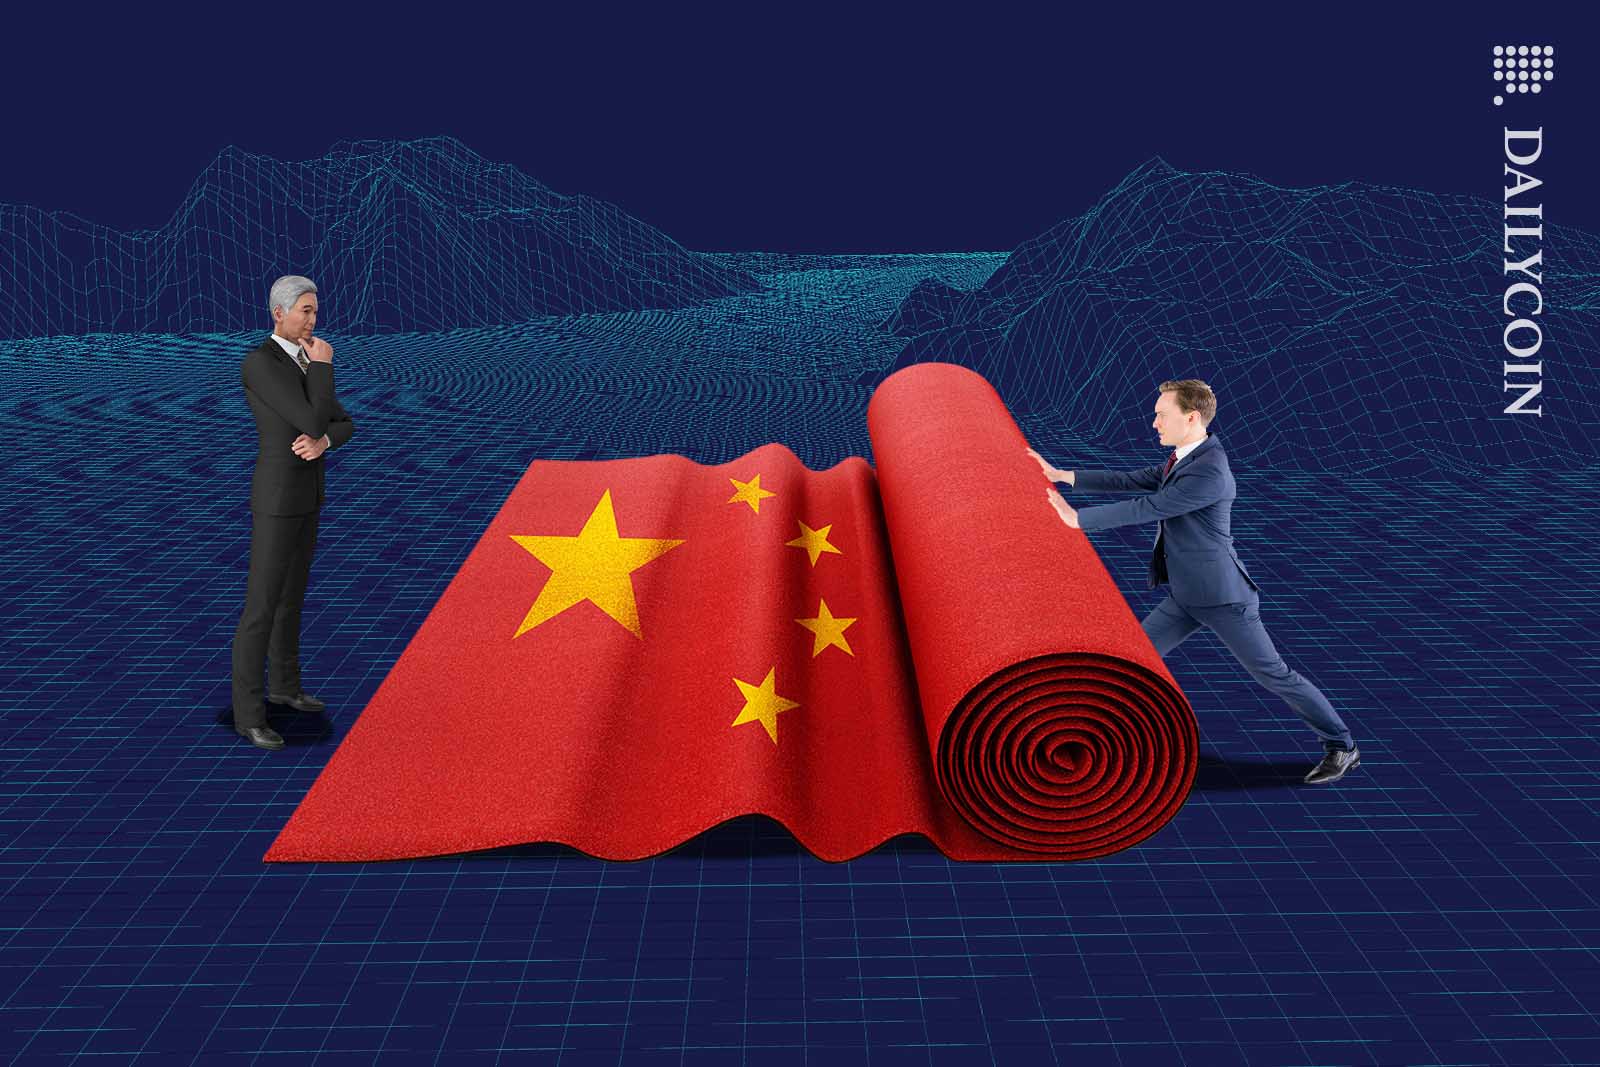 Man rolling up a Chinese flag carpet as an older asian man watches him.